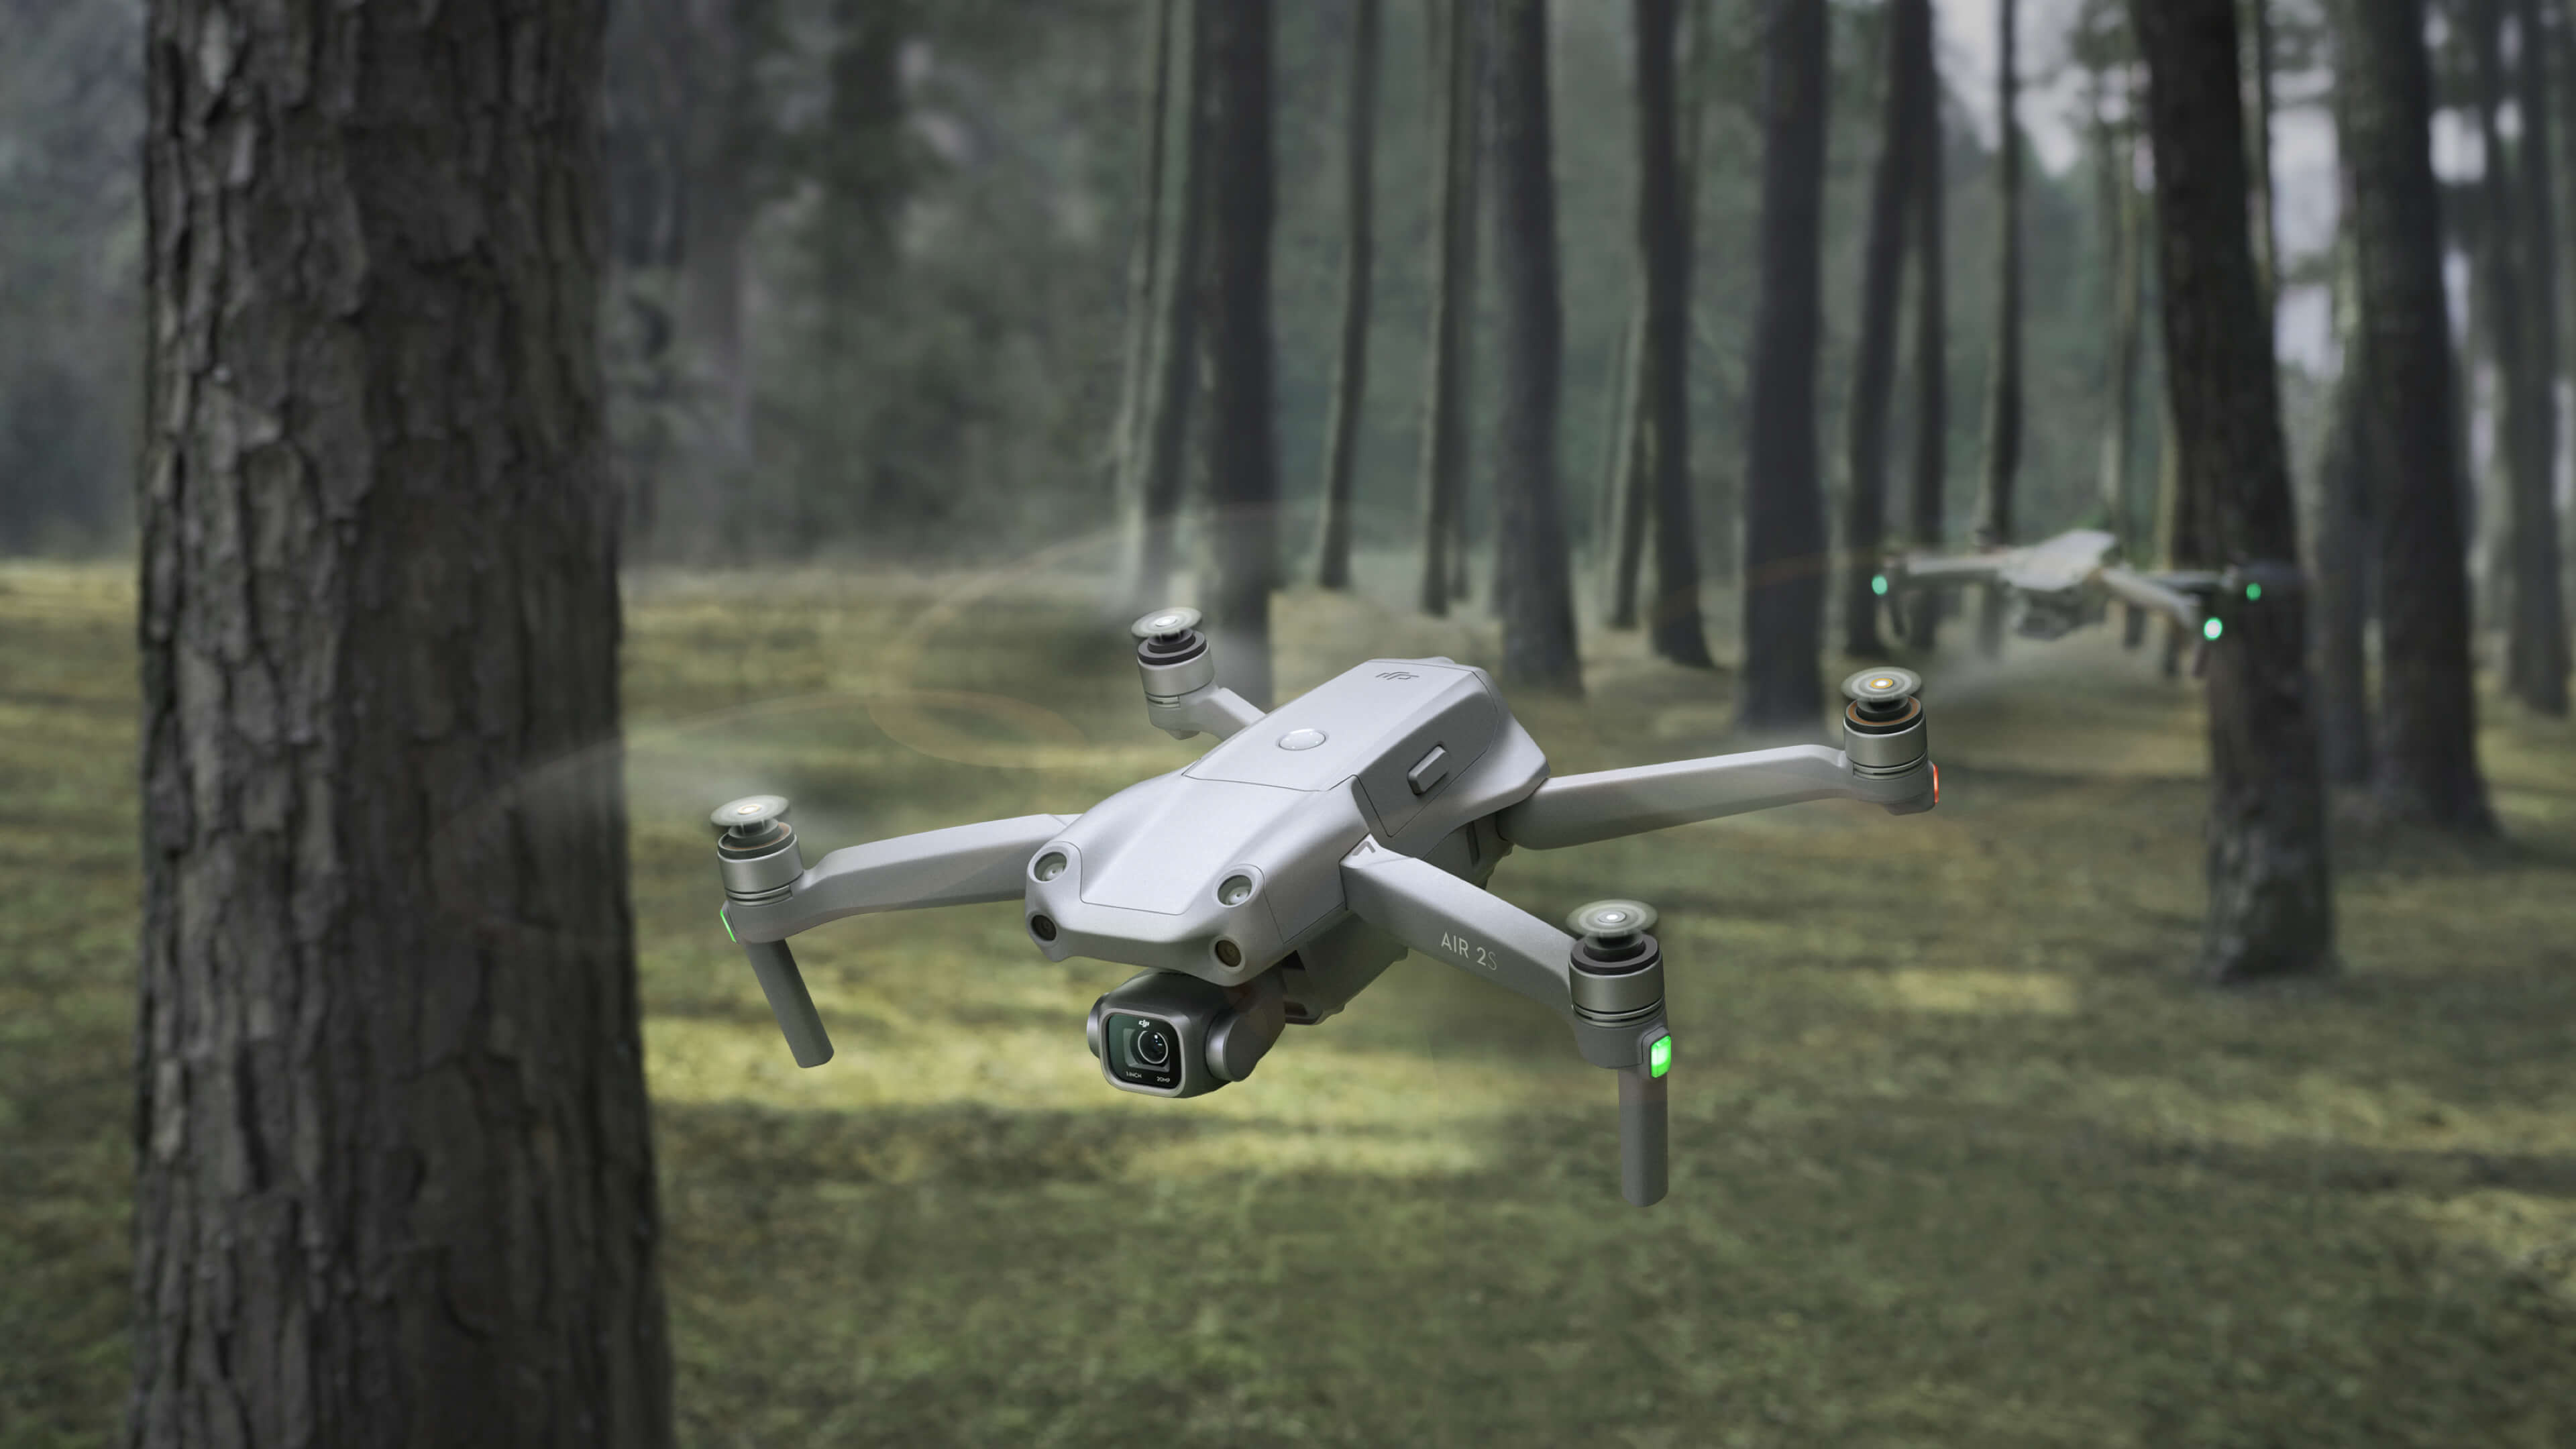 Drone: DJI Air 2S, An unmanned helicopter with four rotors, Quadcopter in flight. 3840x2160 4K Wallpaper.